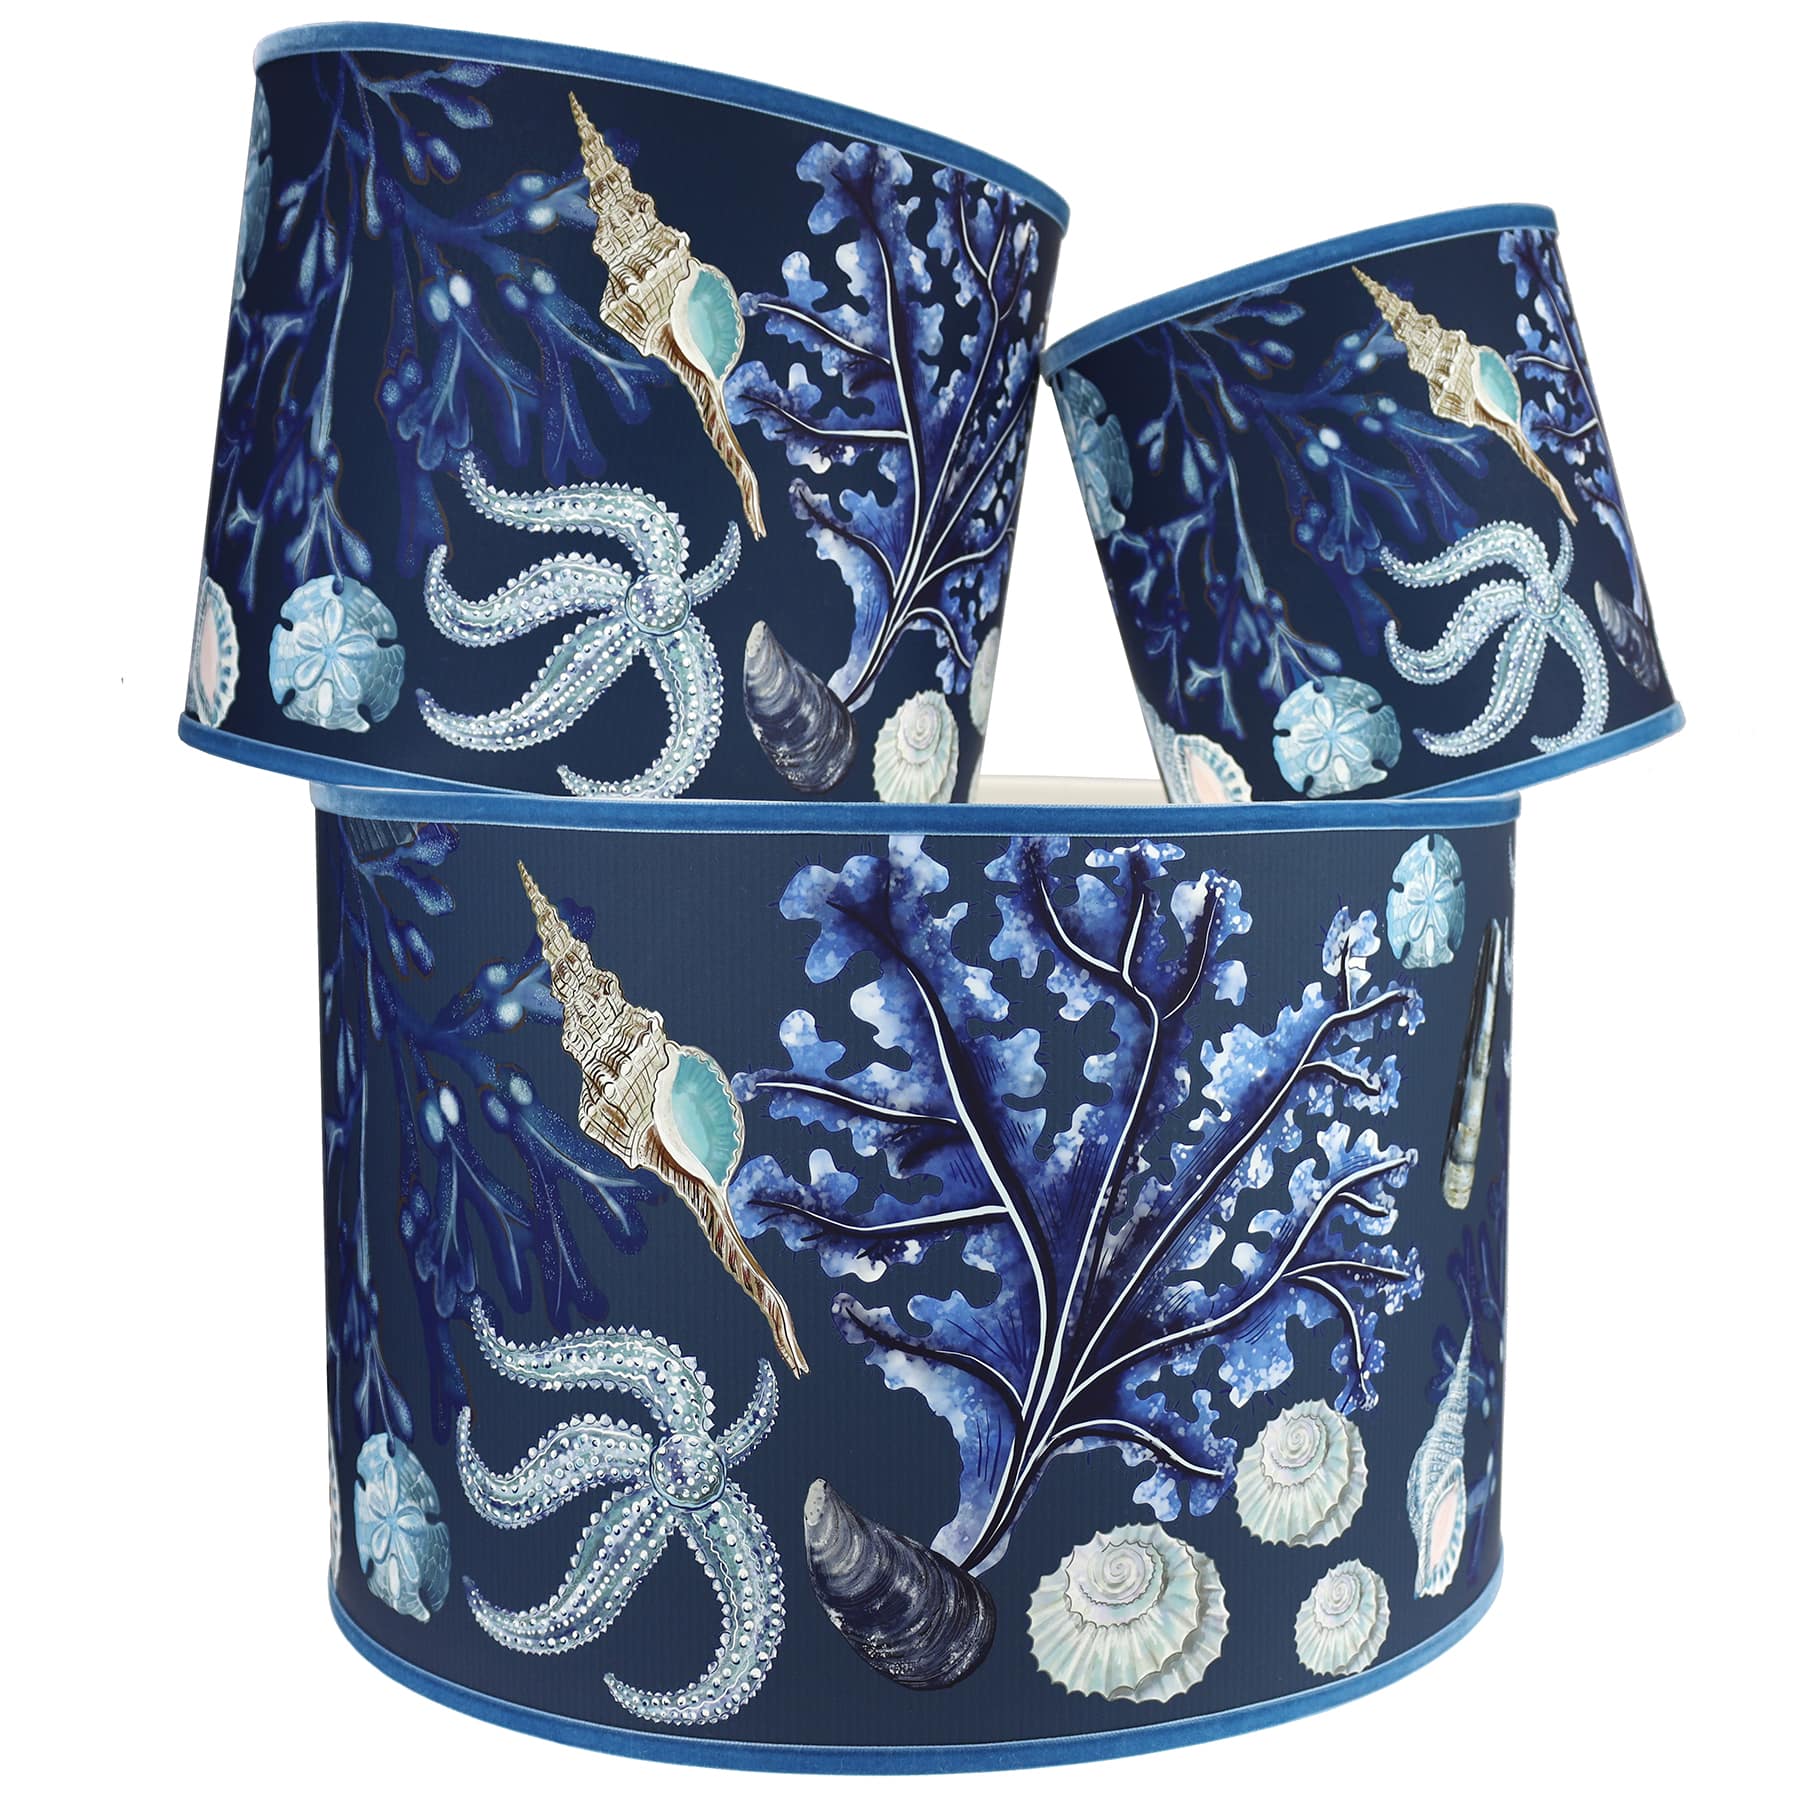 Rockpool Navy Shade With Shells,Seaweed,Sand dollars and Starfish Design in blues/browns with a blue trim on the edge of the shade.The lampshades are shown in a stack of three showing all three sizes.